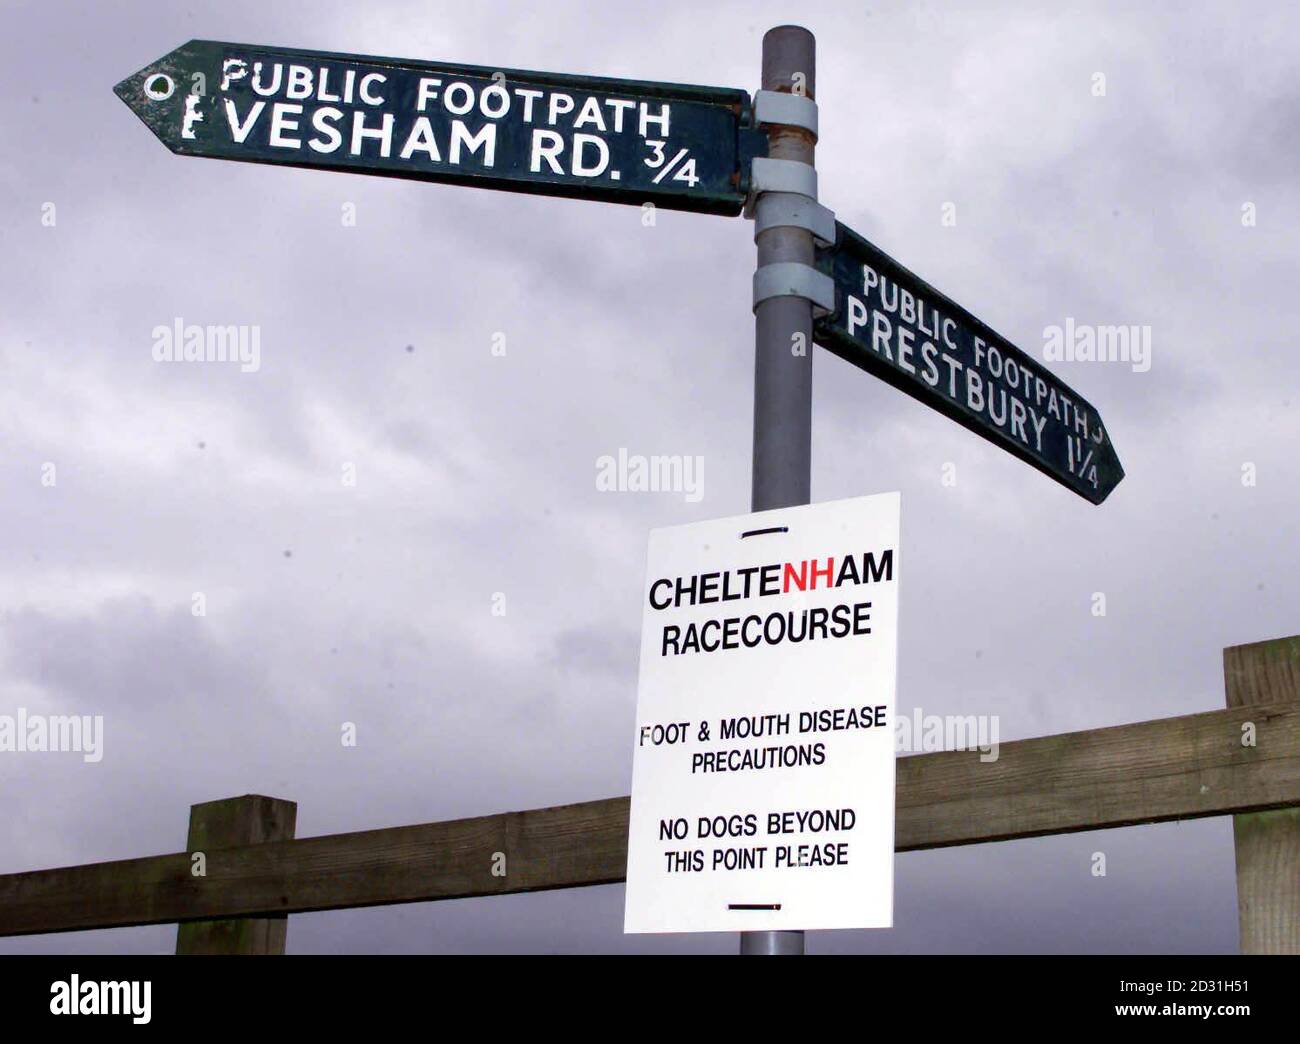 A sign warning about foot and mouth disease precautions at Cheltenham Racecourse. Officials at Cheltenham racecourse revealed their disappointment at the abandonment of next weeks Festival meeting. Stock Photo